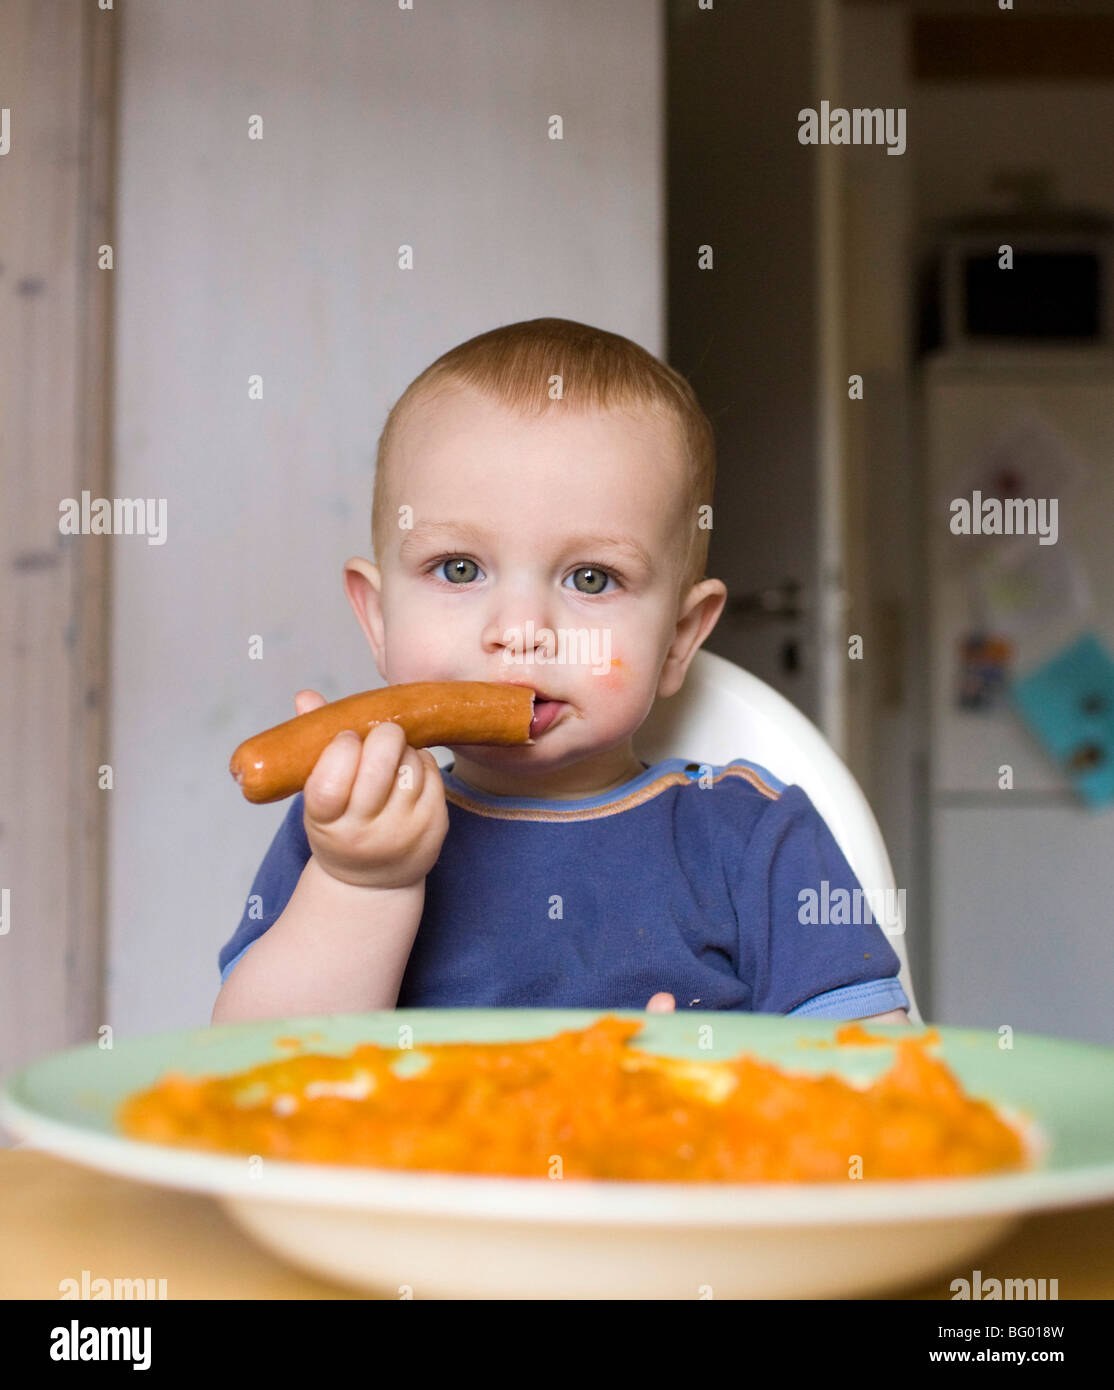 Young boy eating a sausage in a kitchen. Stock Photo